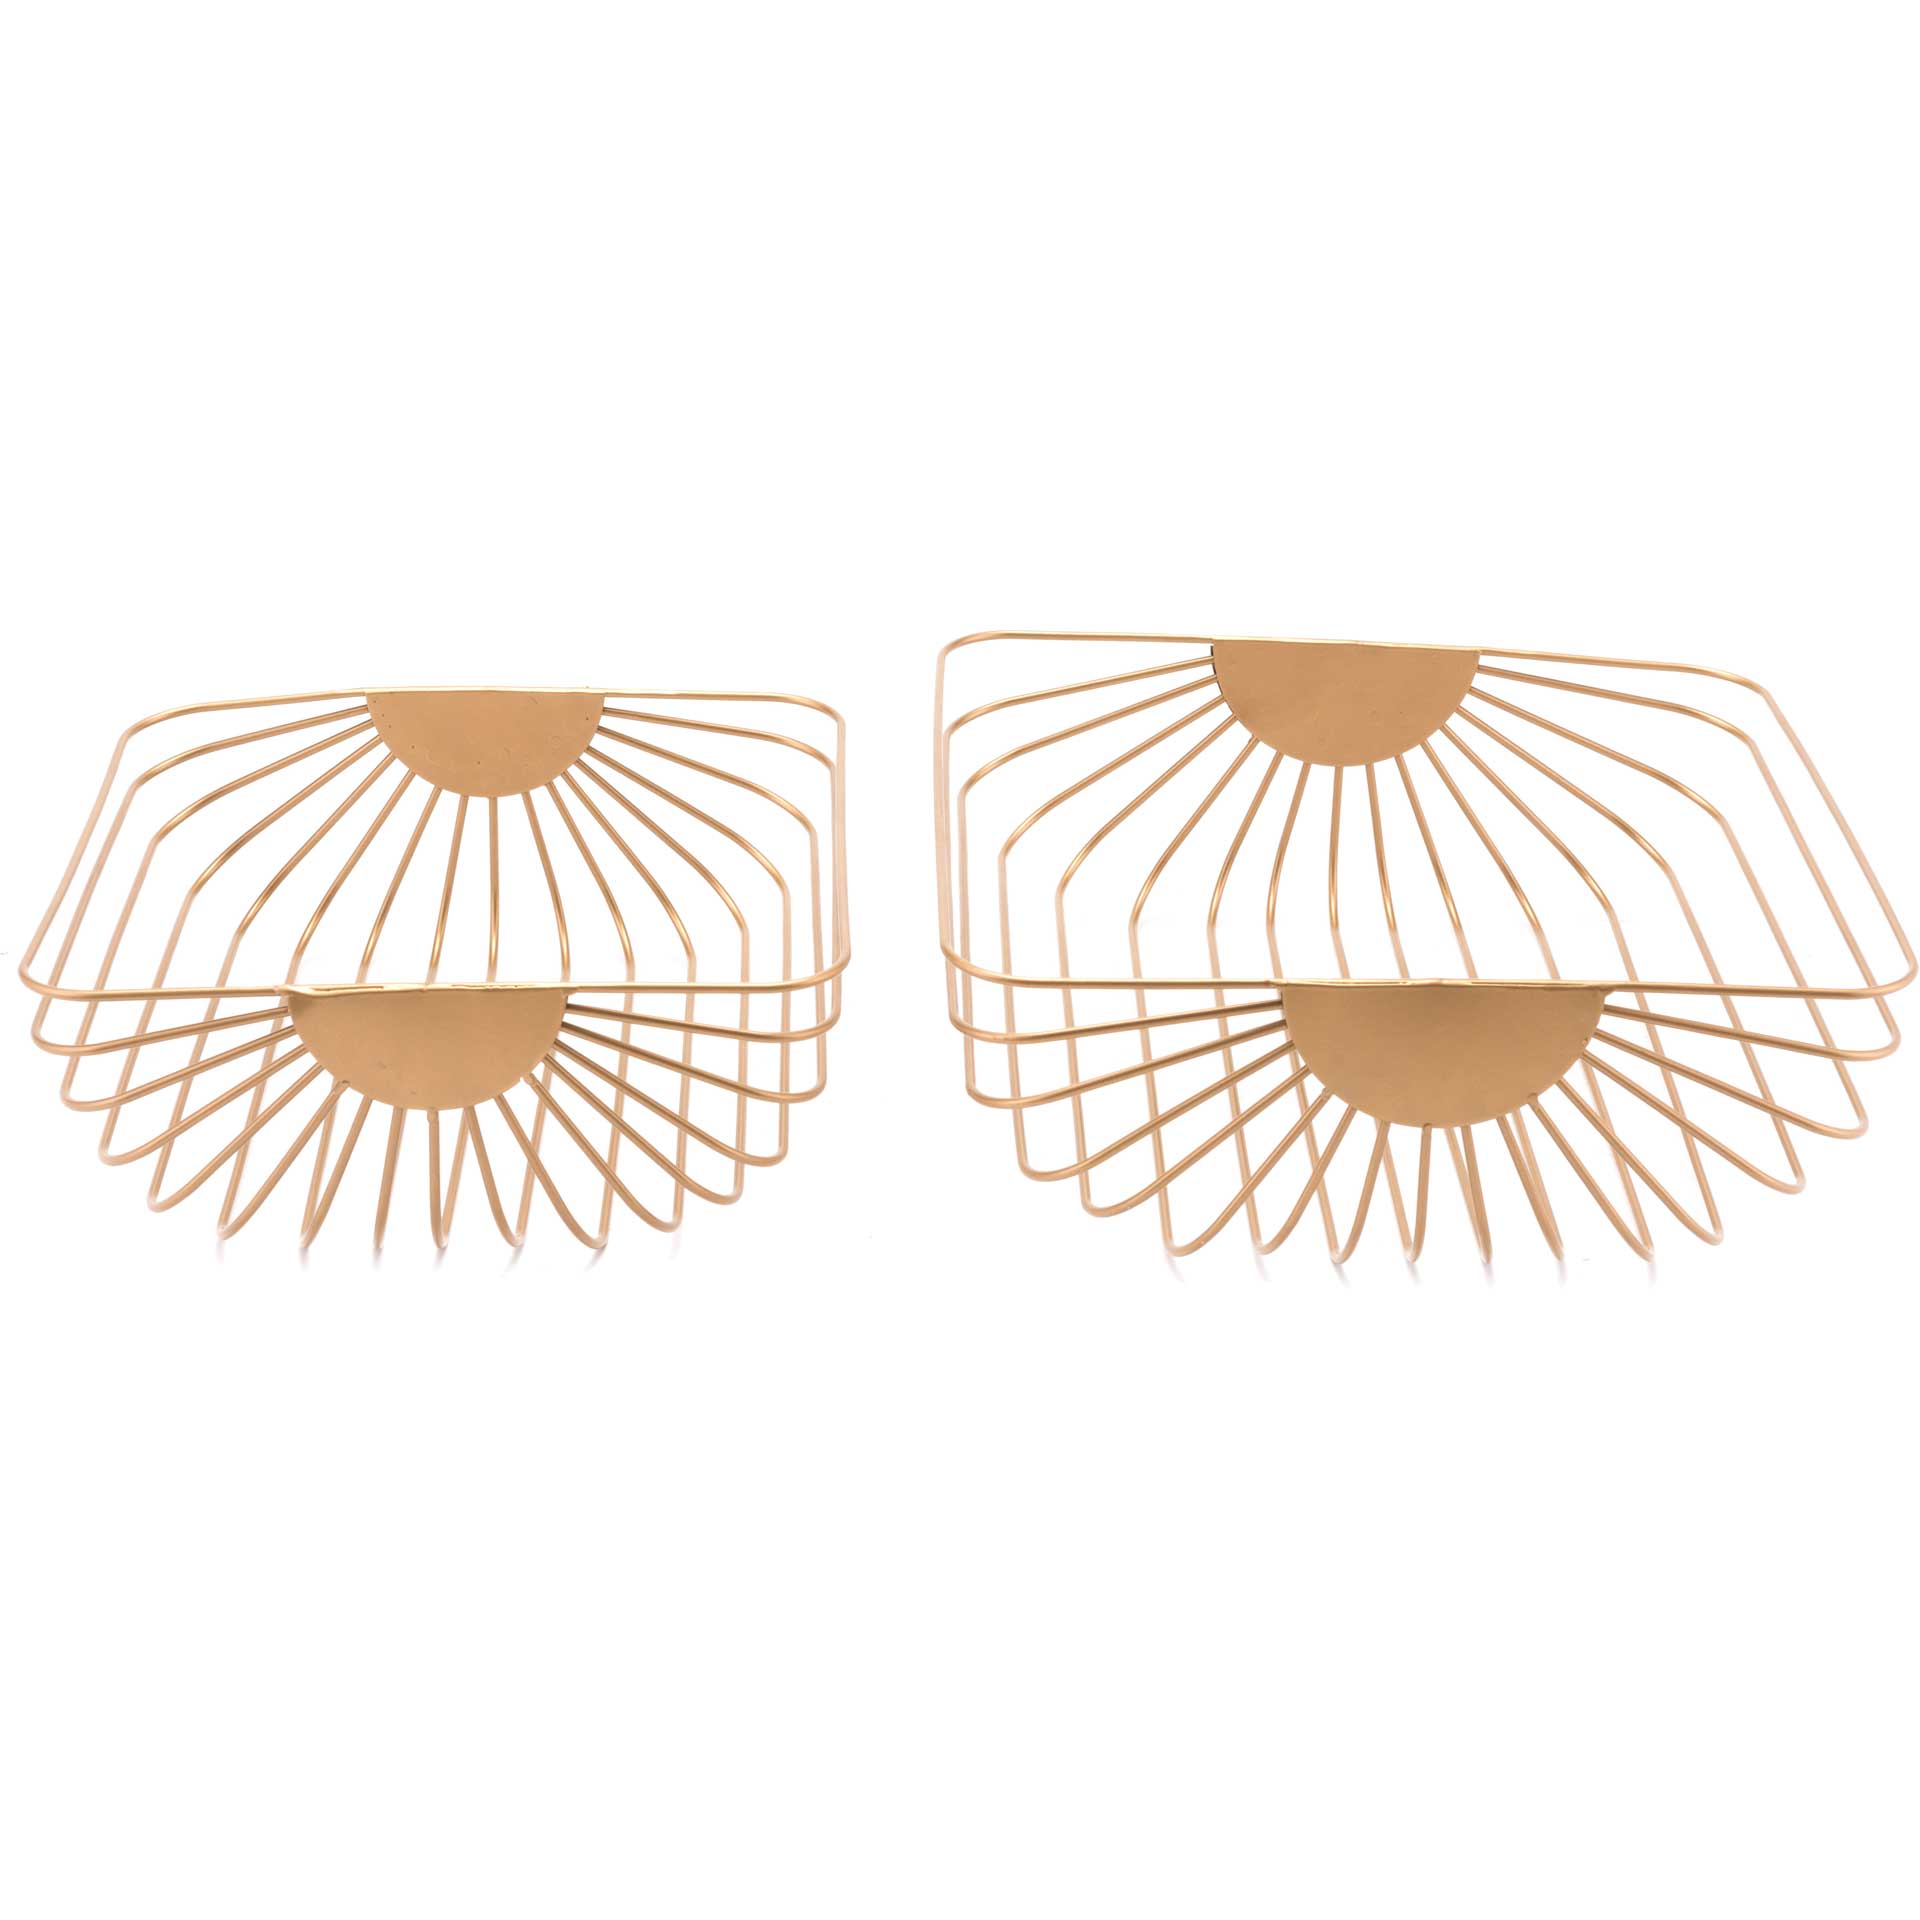 Wired Basket Tray Gold (Set of 2)